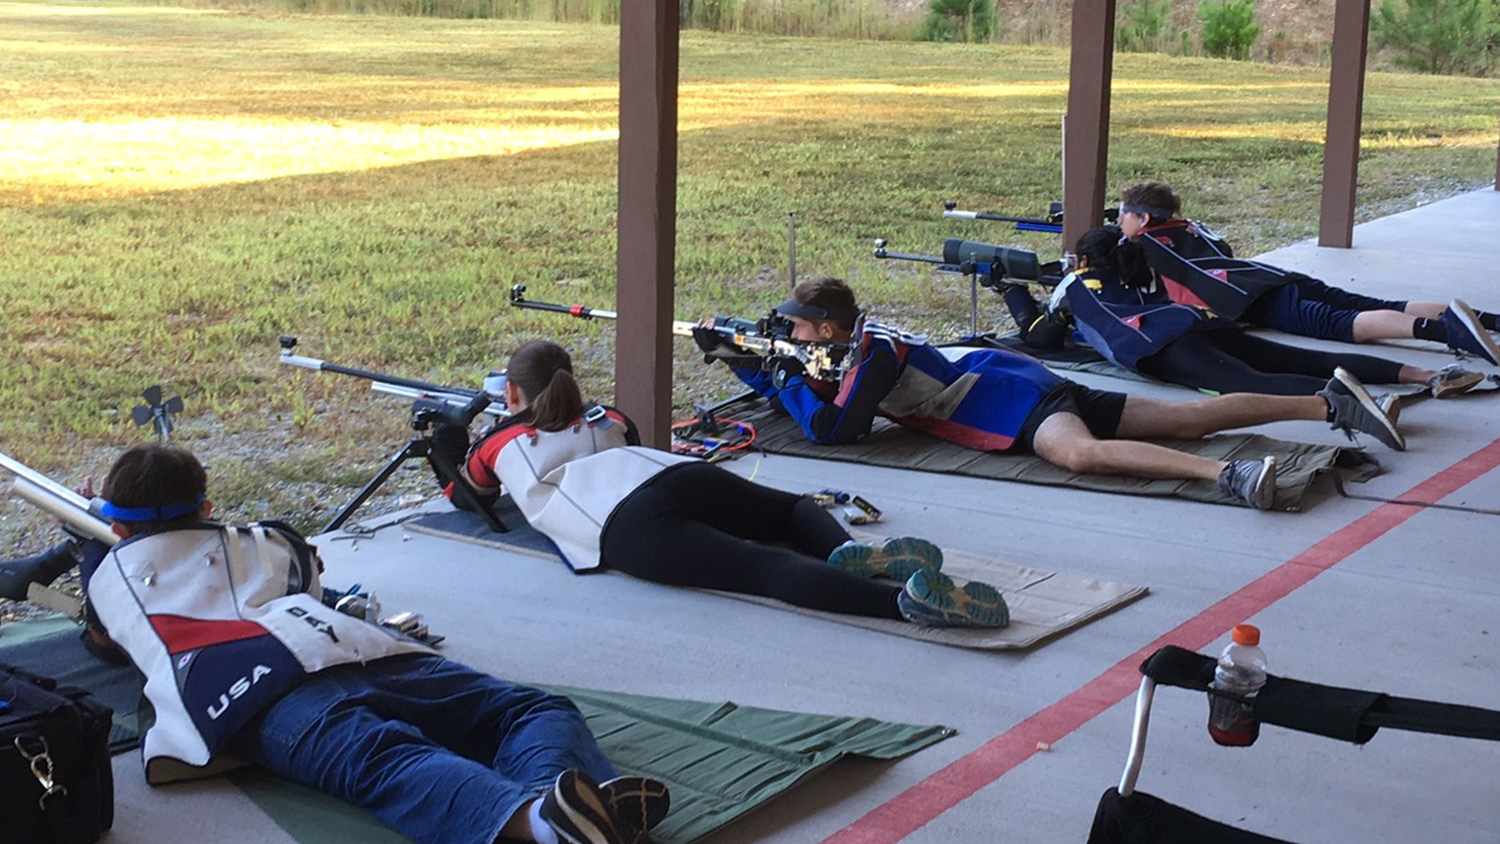 Junior shooters at the 2018 Georgia State Conventional Prone and F-Class Championships